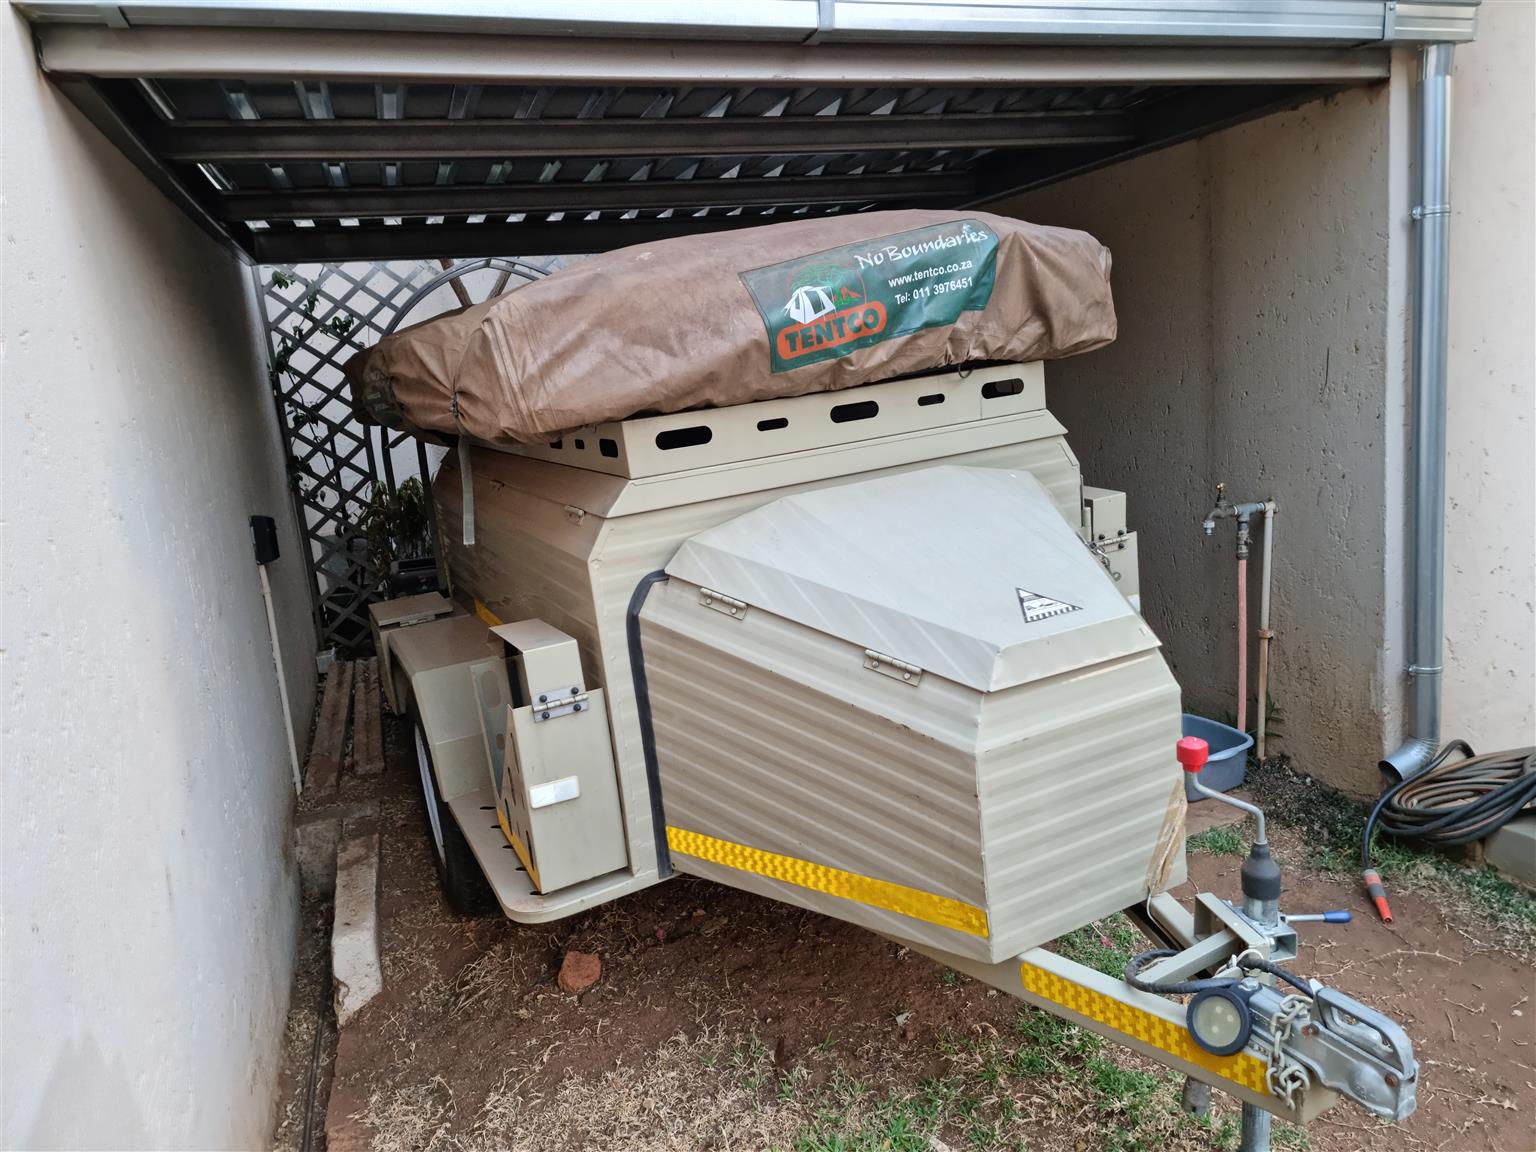 Challanger camping trailer